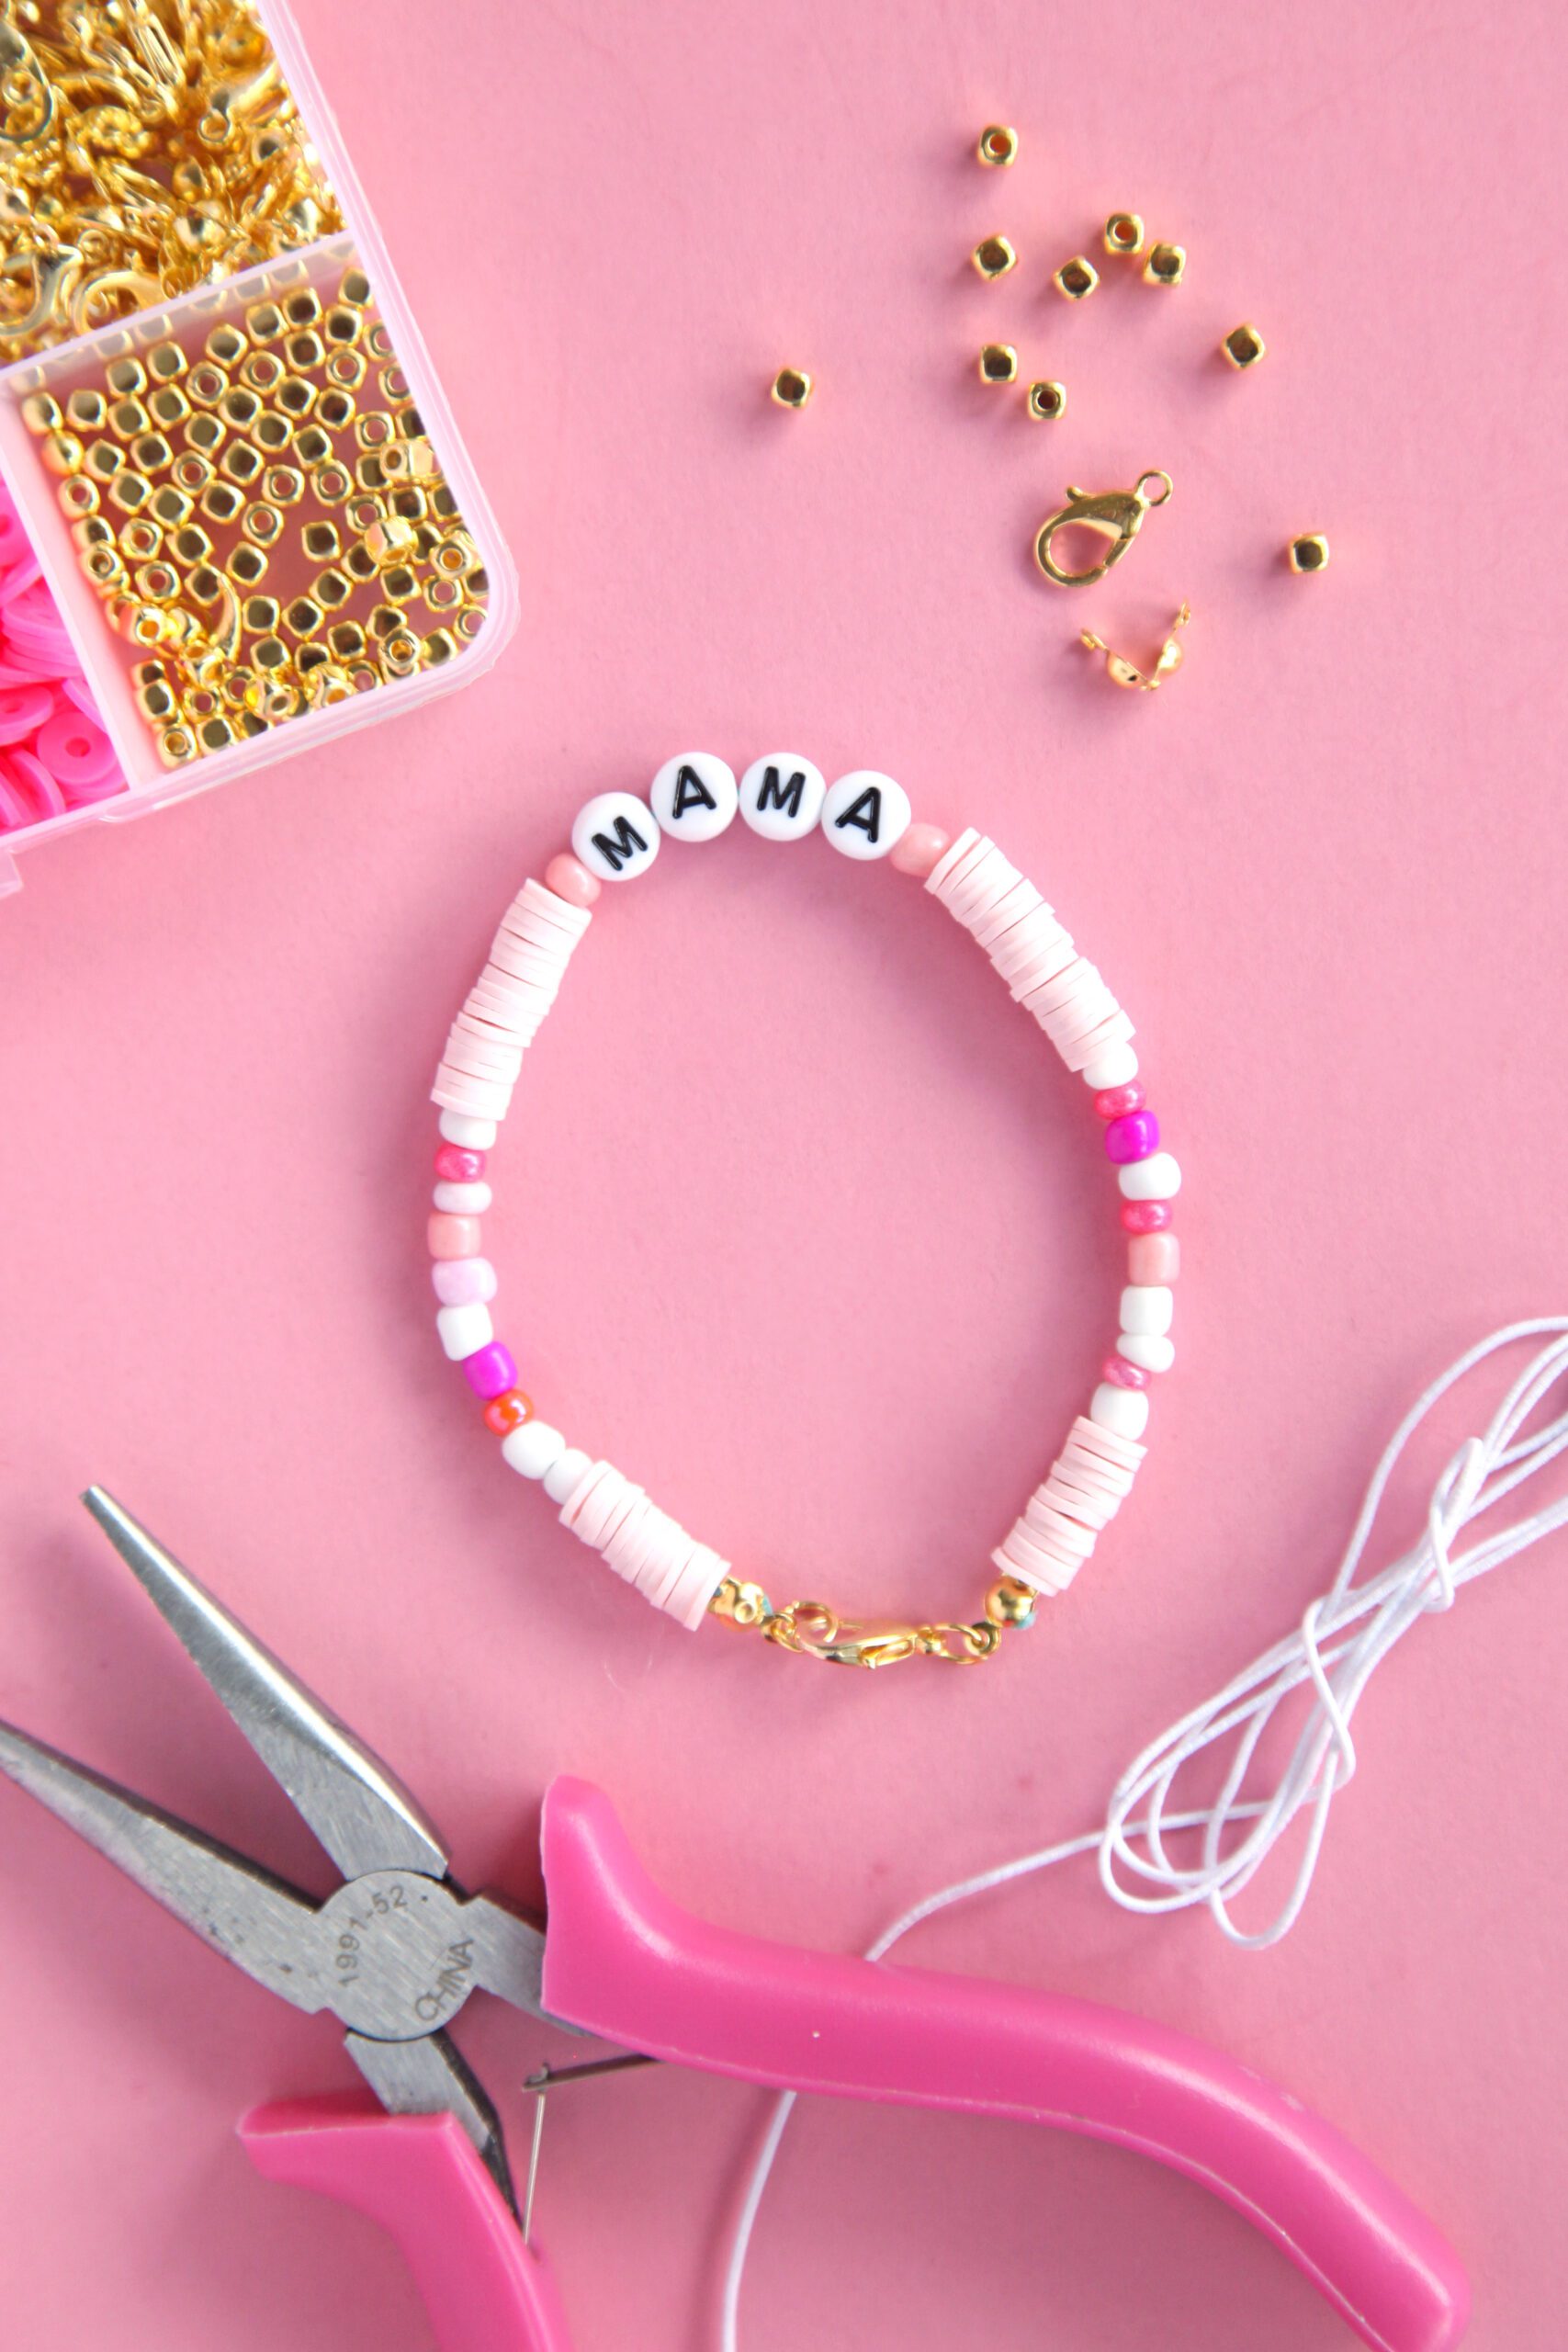 How-to-finish-a-bead-bracelet-6-easy-ways-clamshell-bead-tip